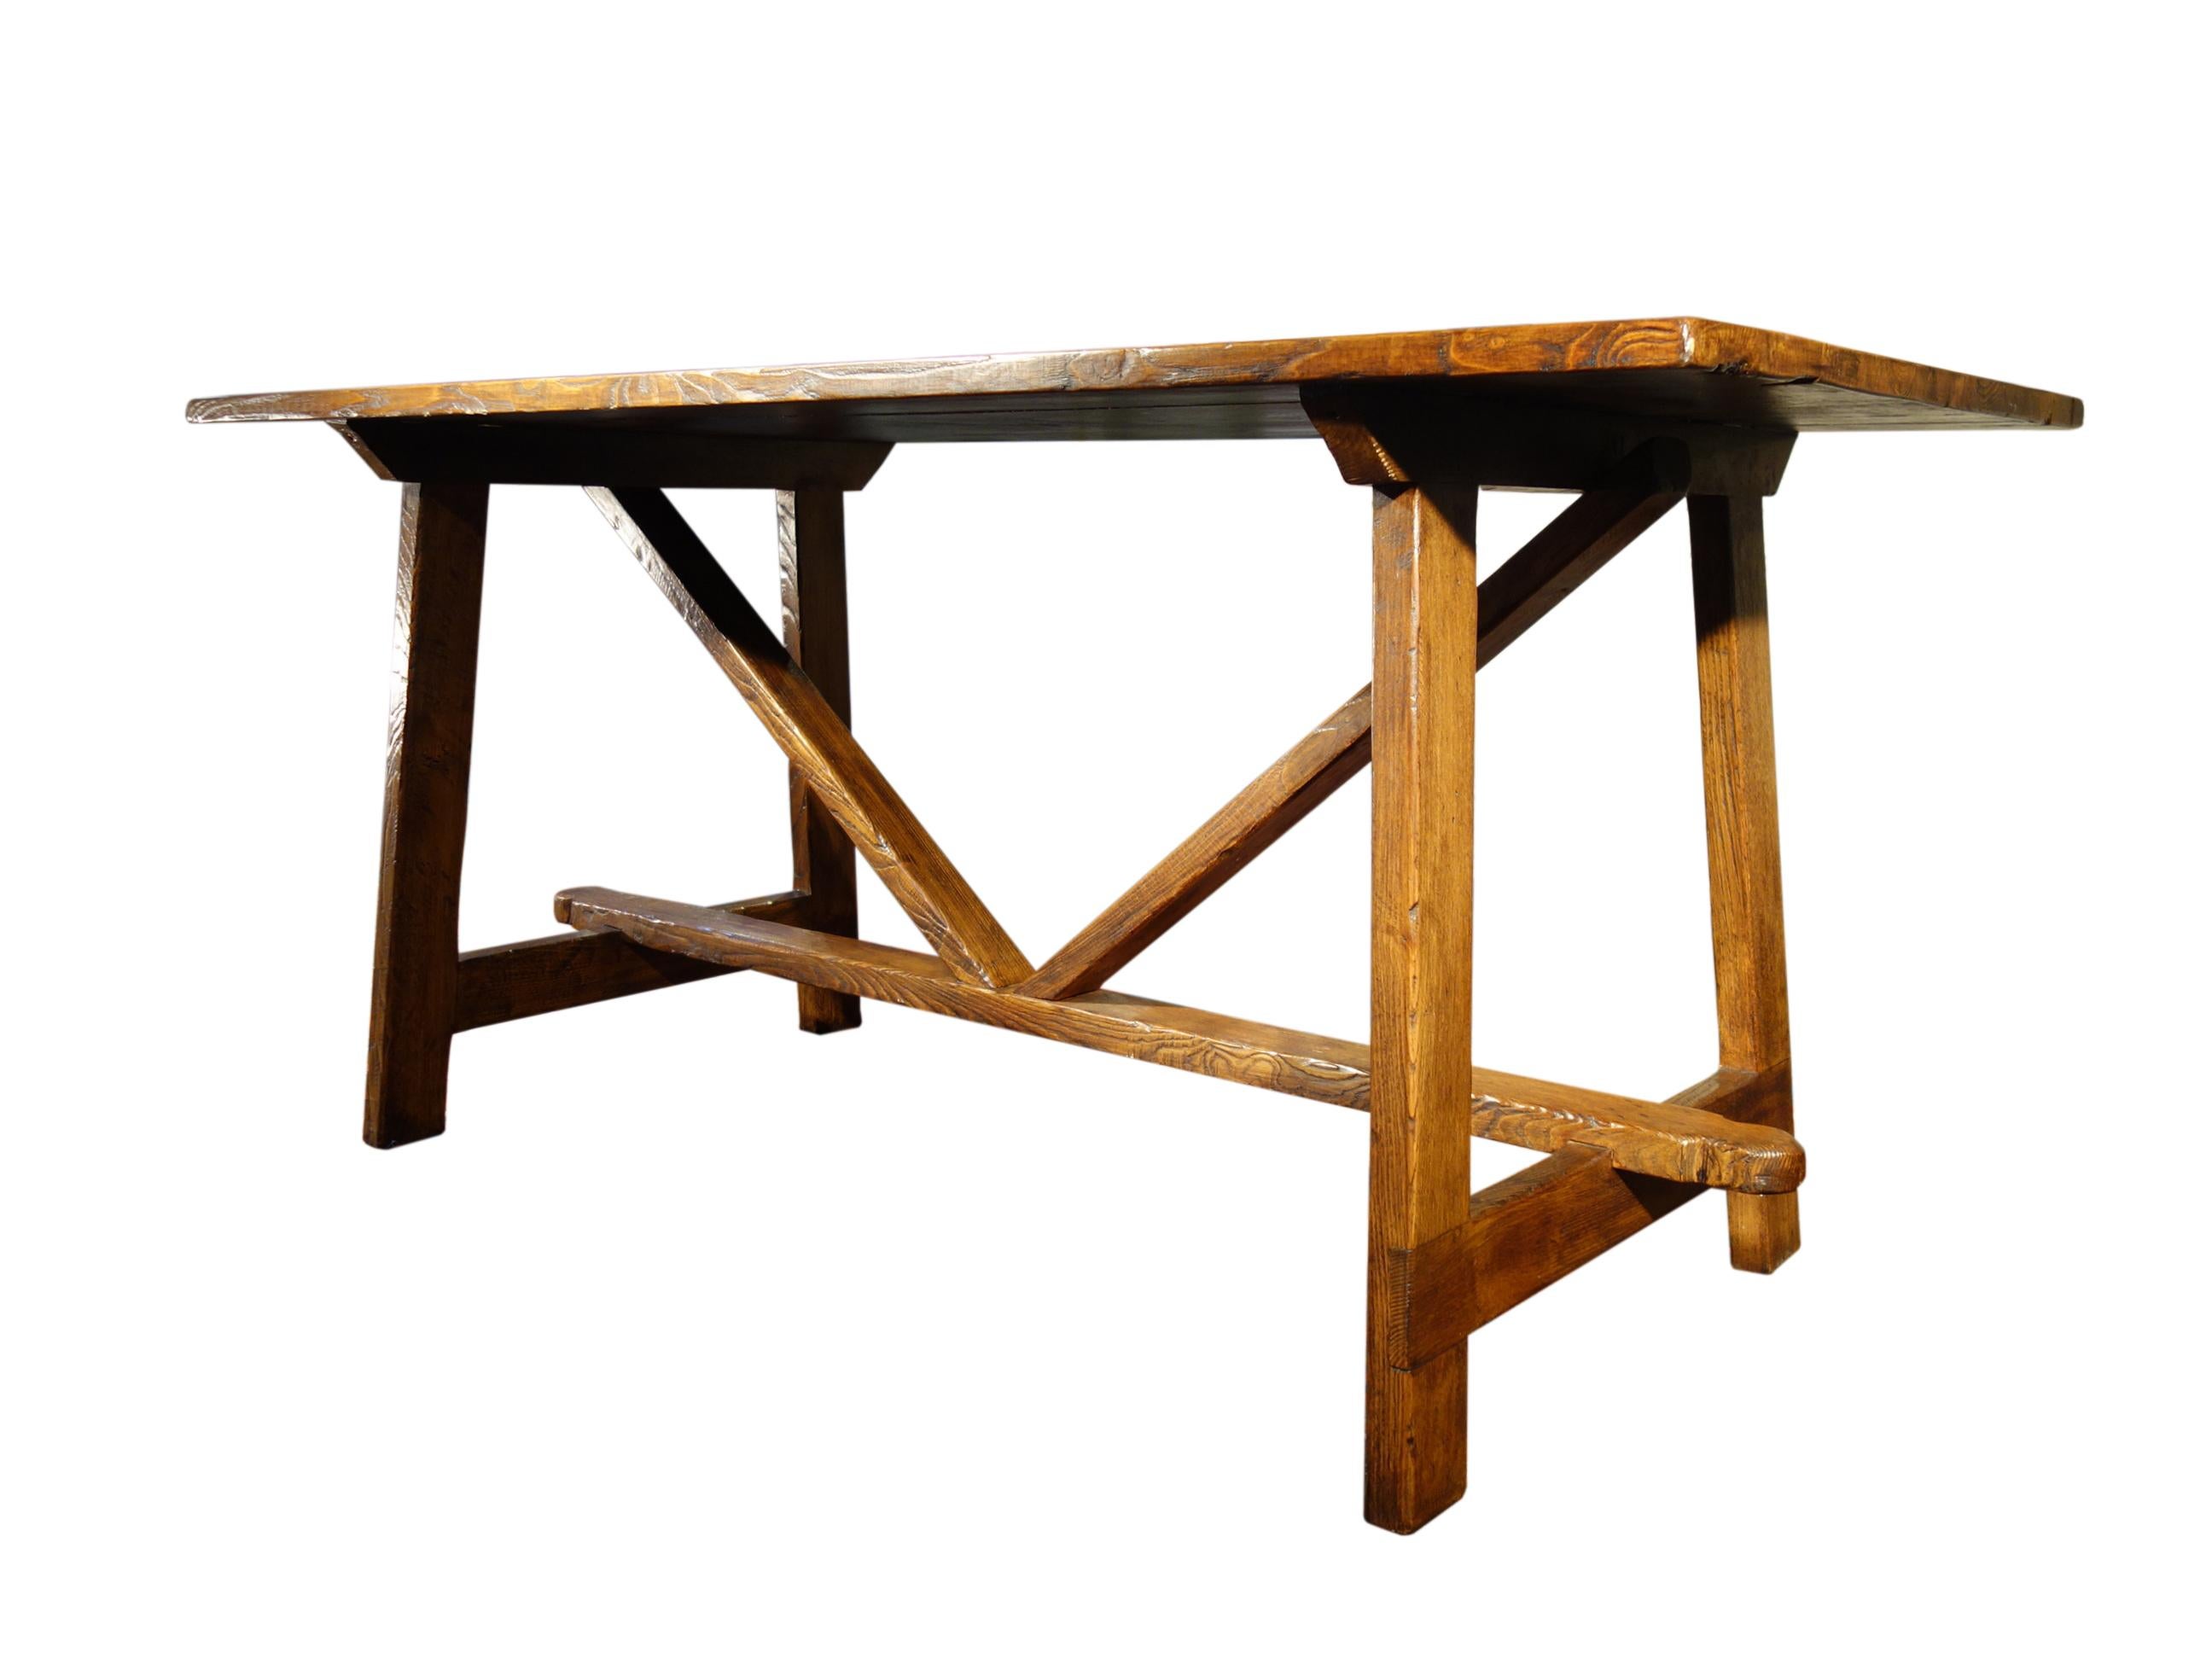 17th C Italian Refectory Style Solid Chestnut CAPRETTA Table with dining options For Sale 3